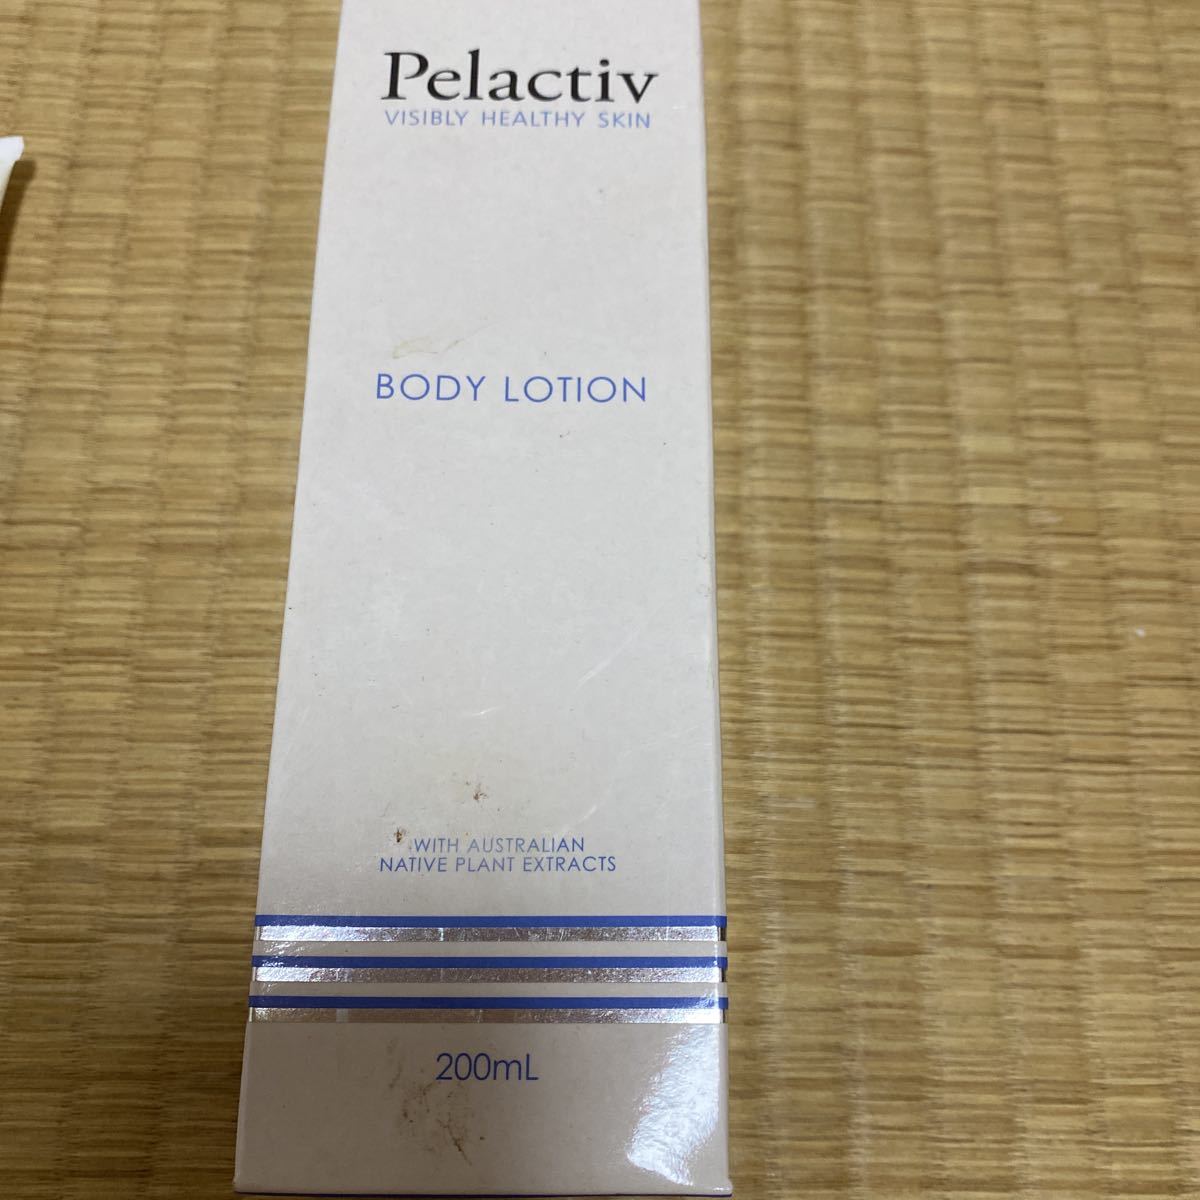 Pelactiv body lotion face lotion lotion body 200ml brand imported car 